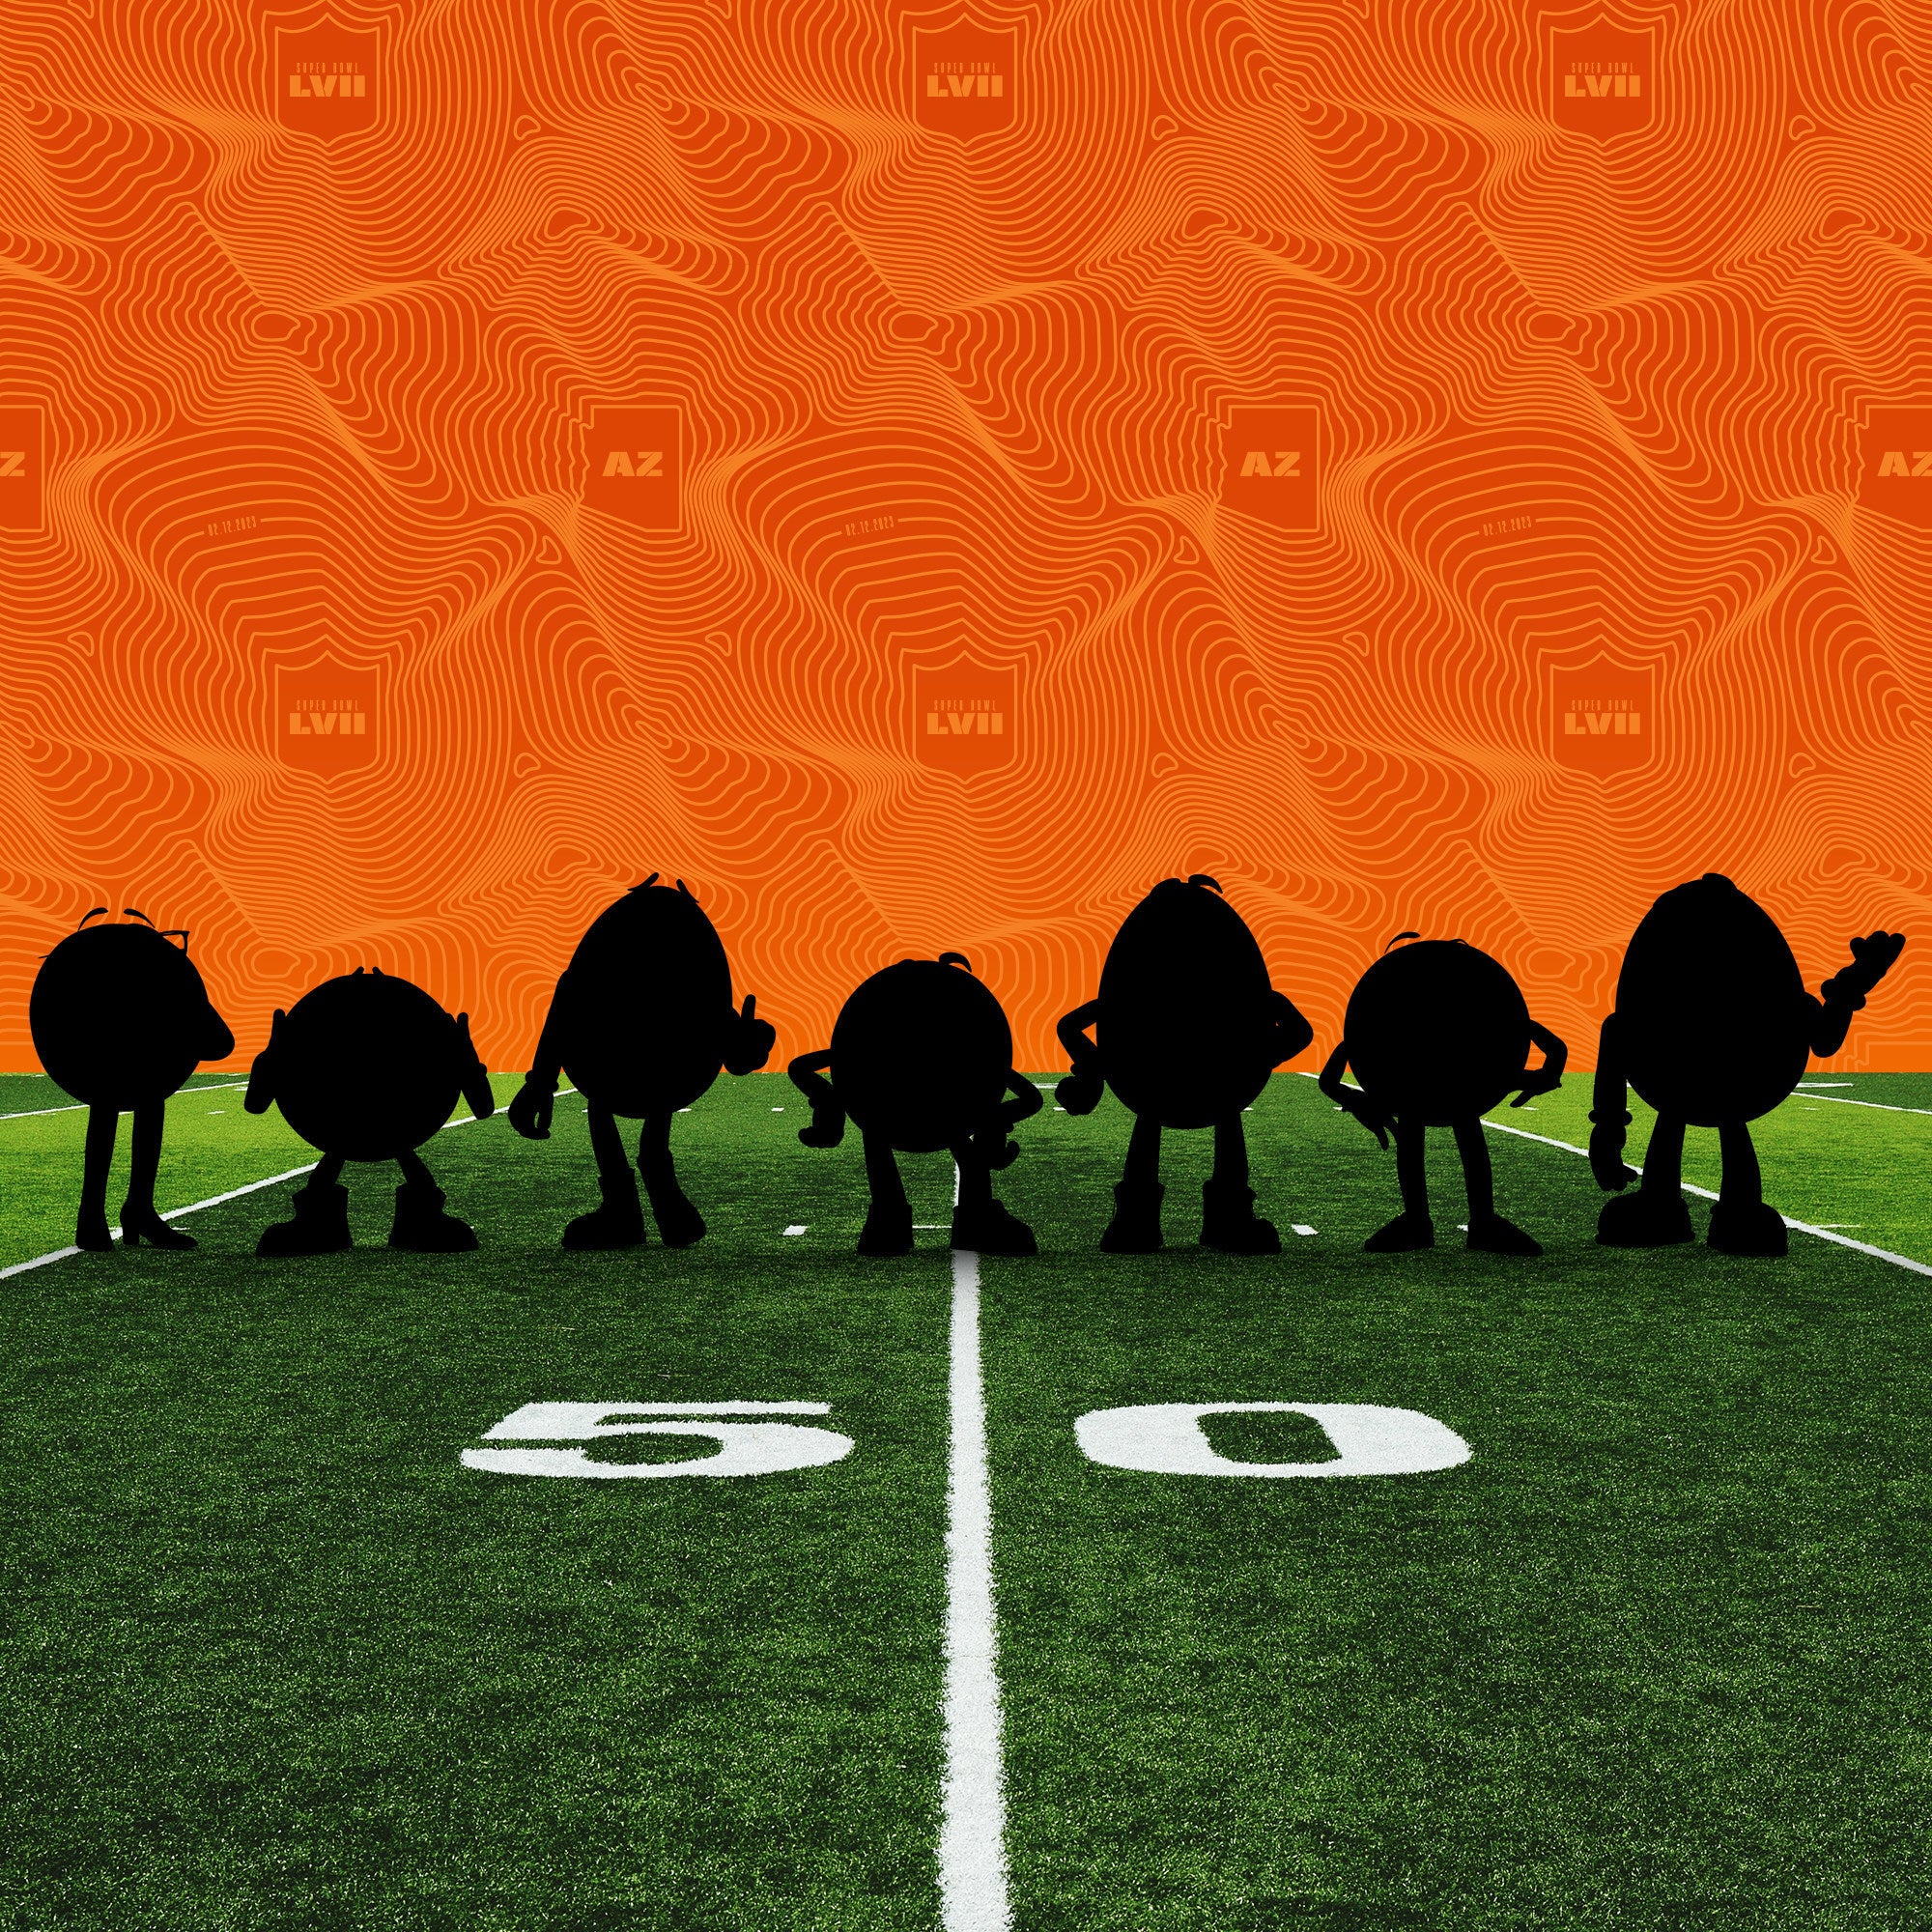 The group of M&Ms on a gridiron, in silhouette.